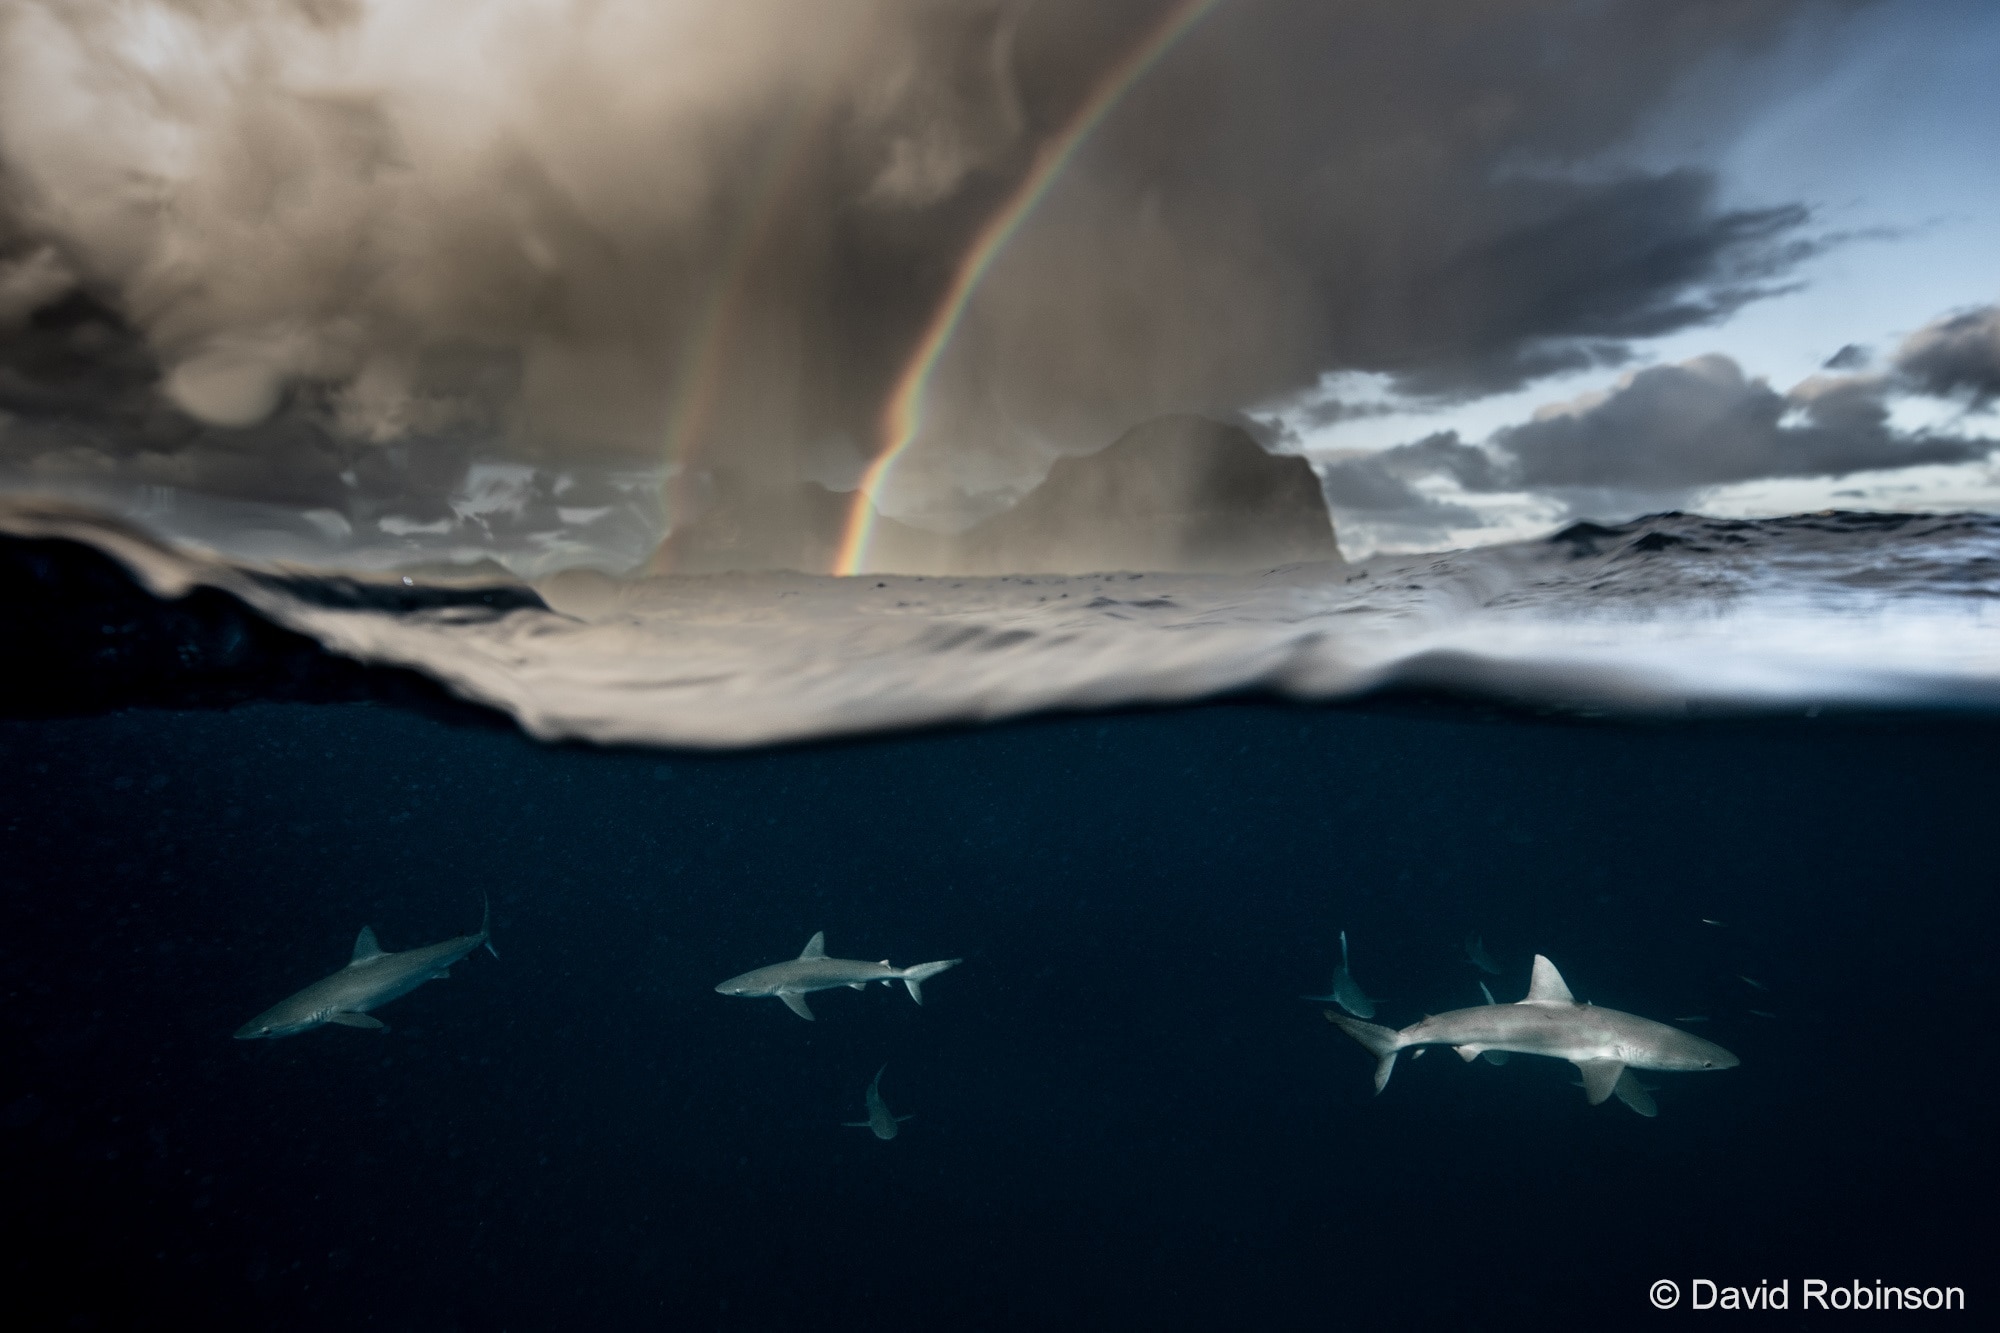 An image of three sharks in the ocean with rainbows in the sky.